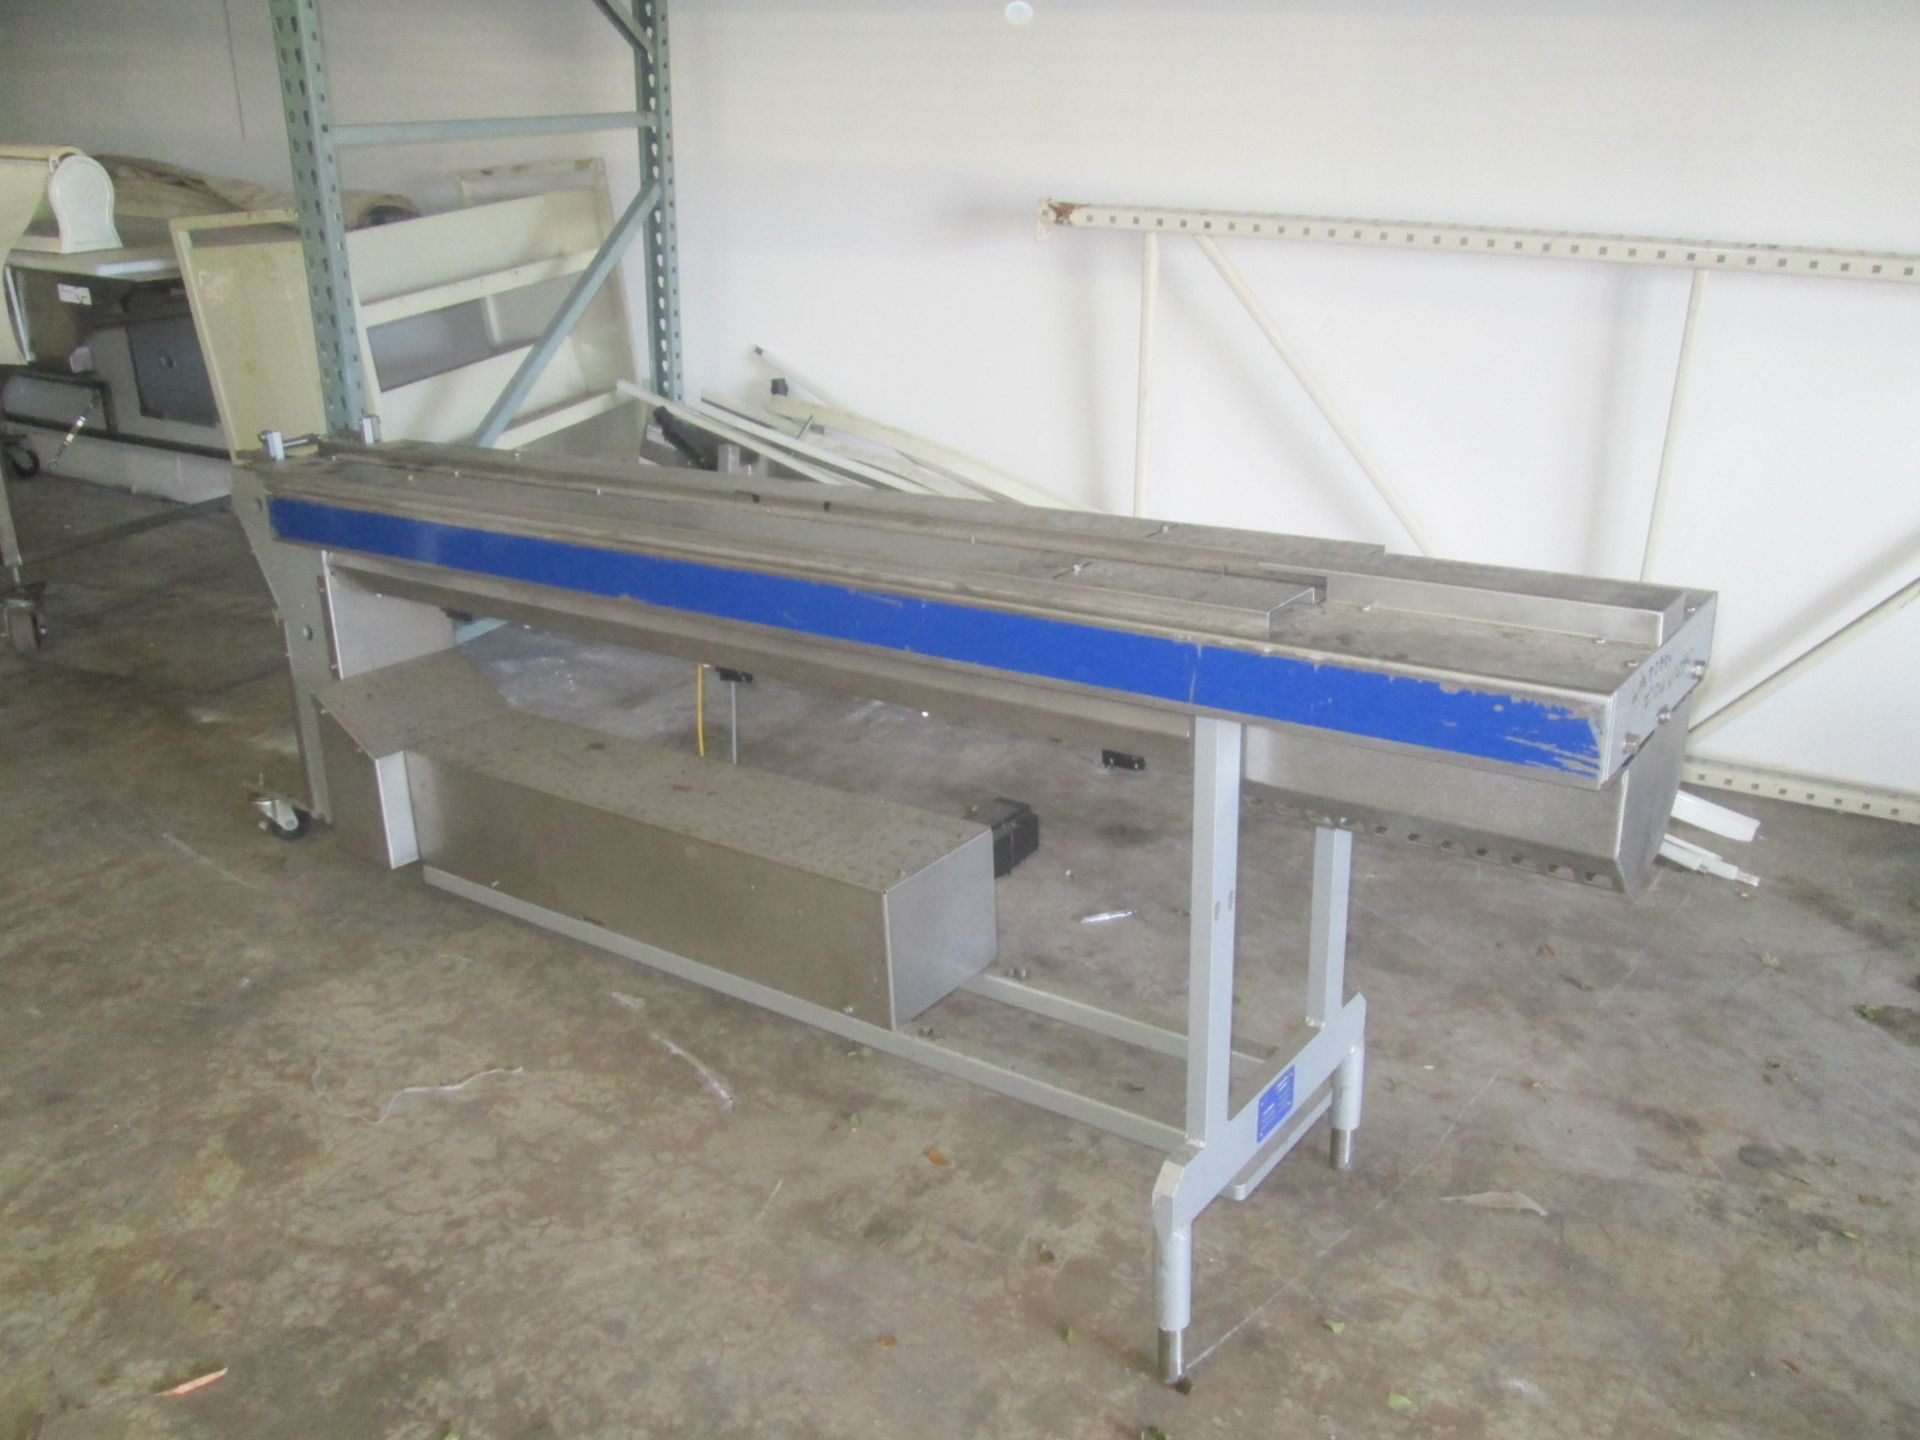 Sig Doboy CrossFeede Serial number 03-24859, Inclined Cleated Rollaway Stainless Steel Conveyor - Image 2 of 8